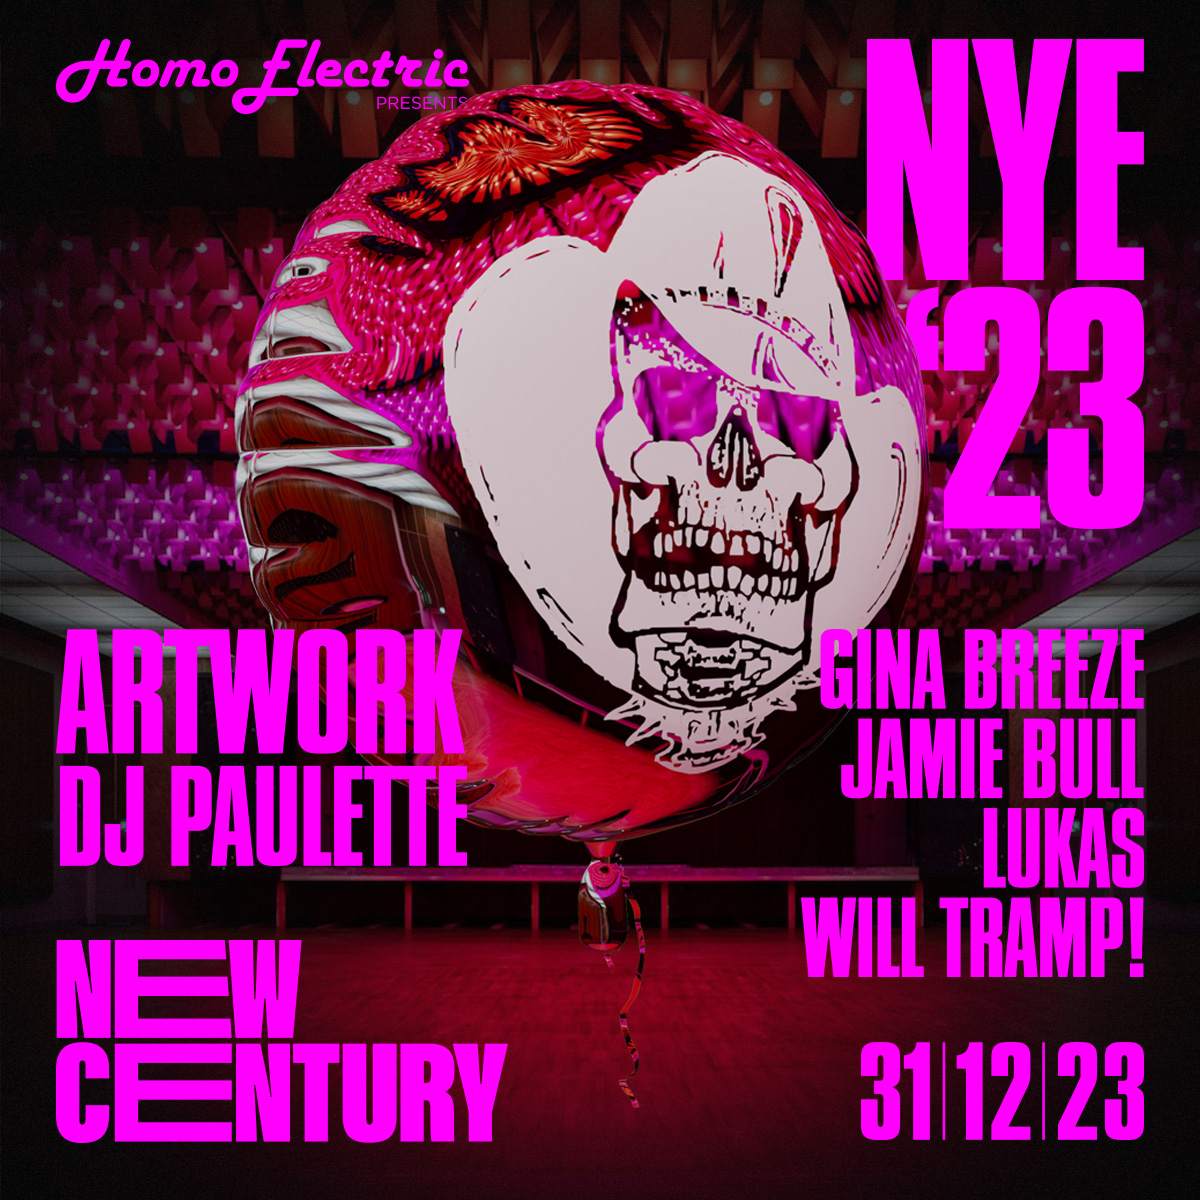 Homoelectric NYE New Century Hall Manchester - フライヤー表